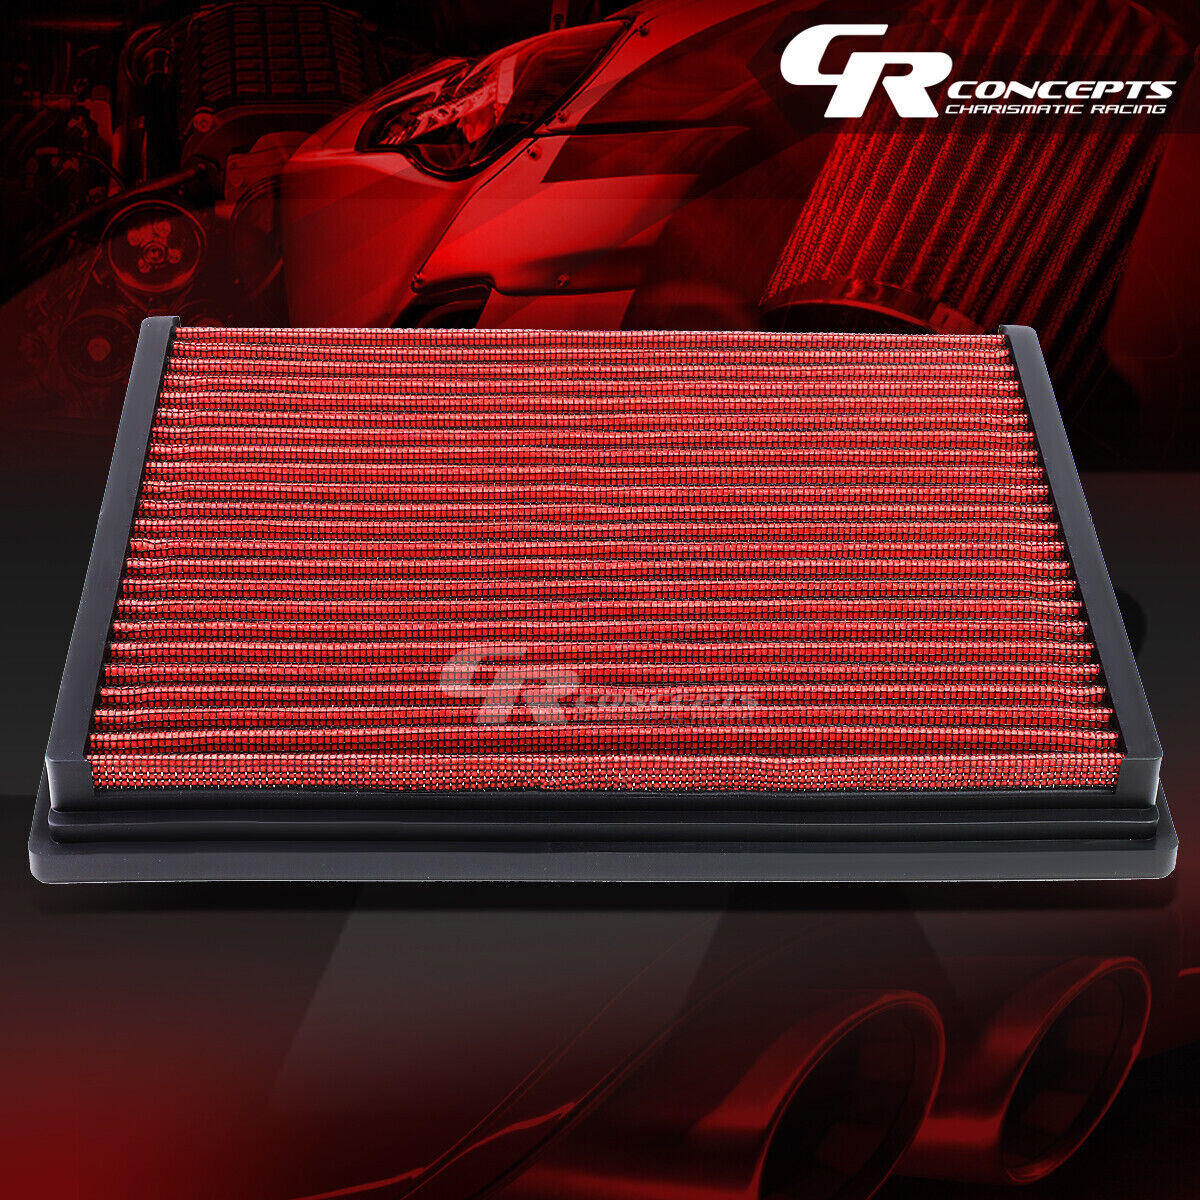 RED WASHABLE HIGH FLOW AIR FILTER PANEL FOR 96-04 AUDI A4/A6/S4/S6 VW PASSAT